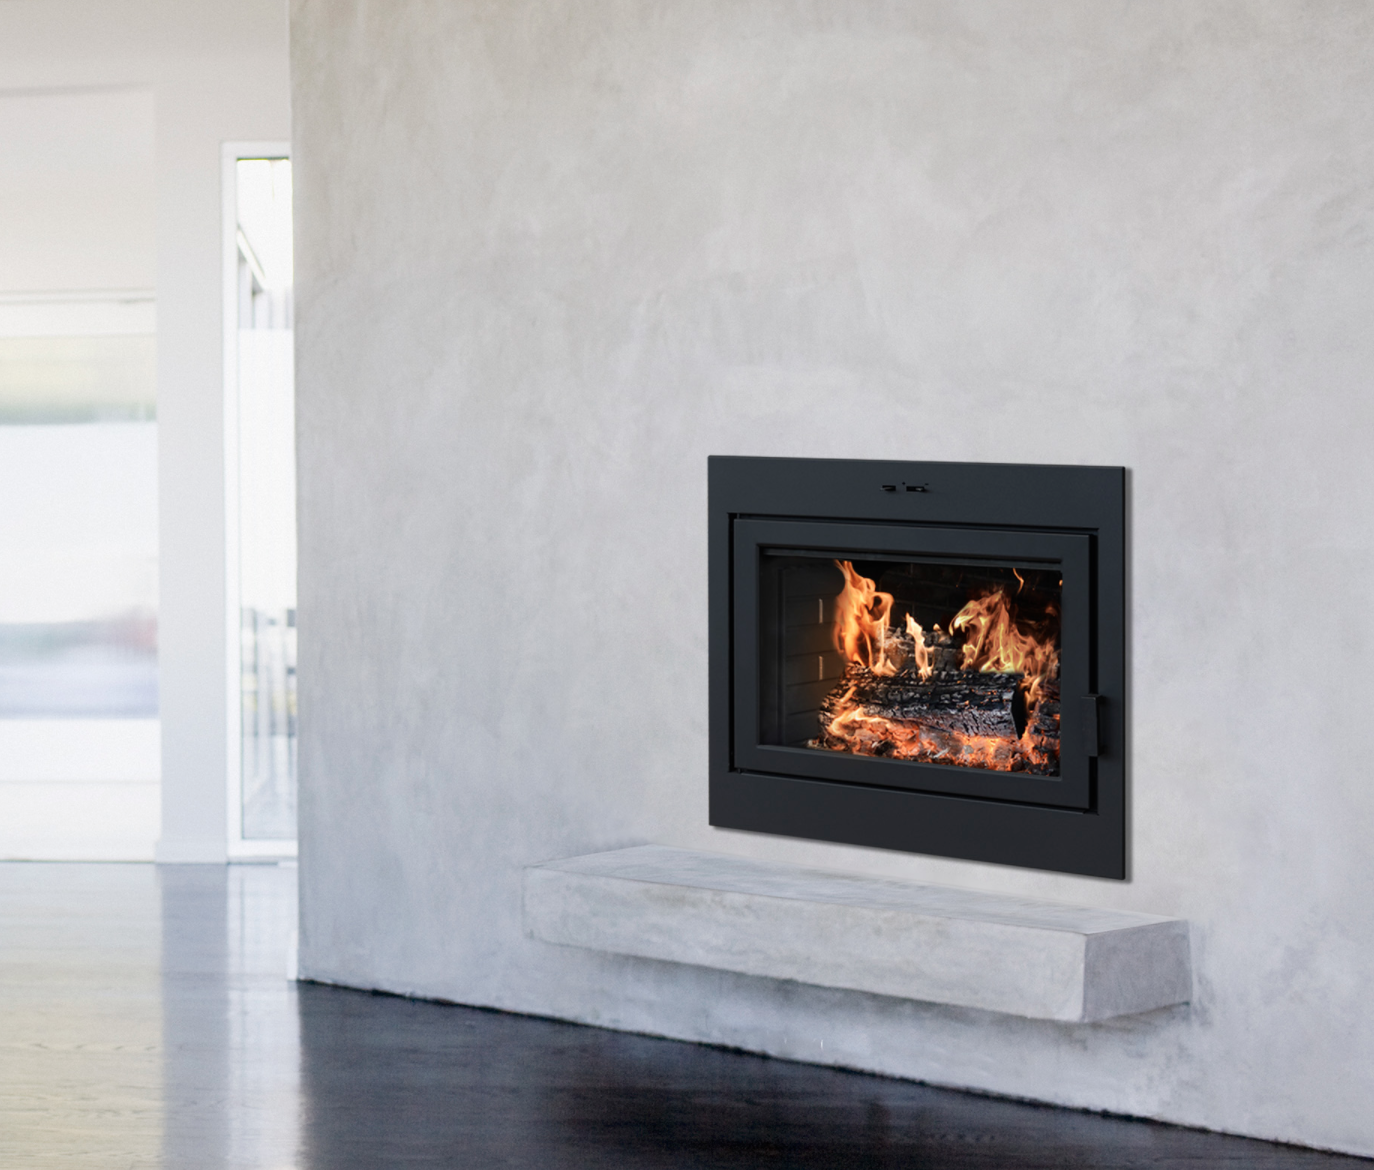 https://woodchimney.com/wp-content/uploads/2021/11/Supreme-Astria-38-Wood-Fireplace-Clean-Face-CF.png